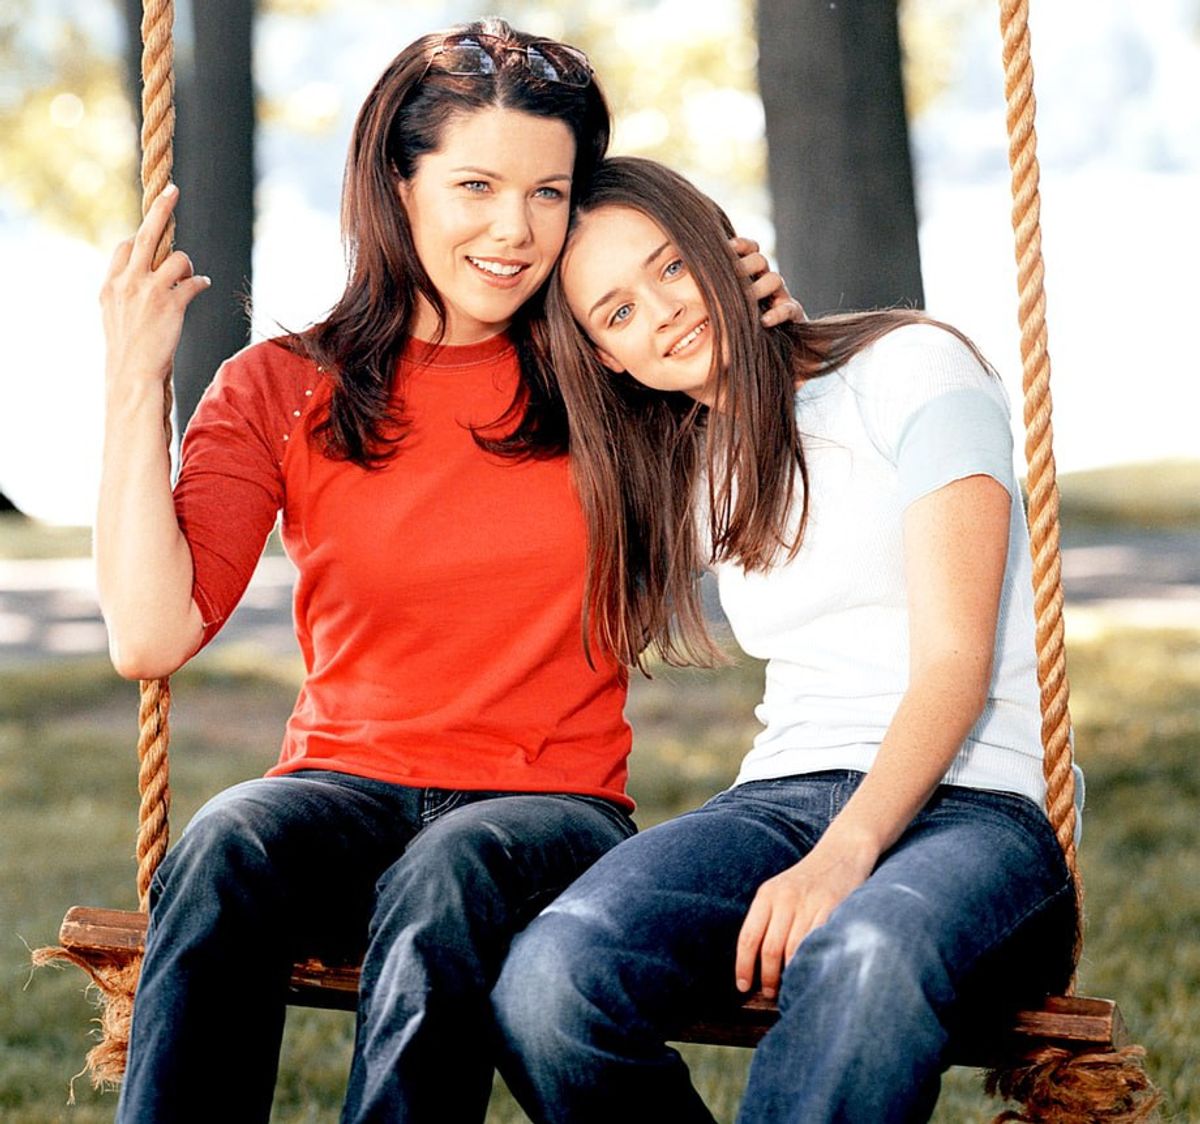 20 Thoughts A Millennial Had While Watching 'Gilmore Girls' For The First Time